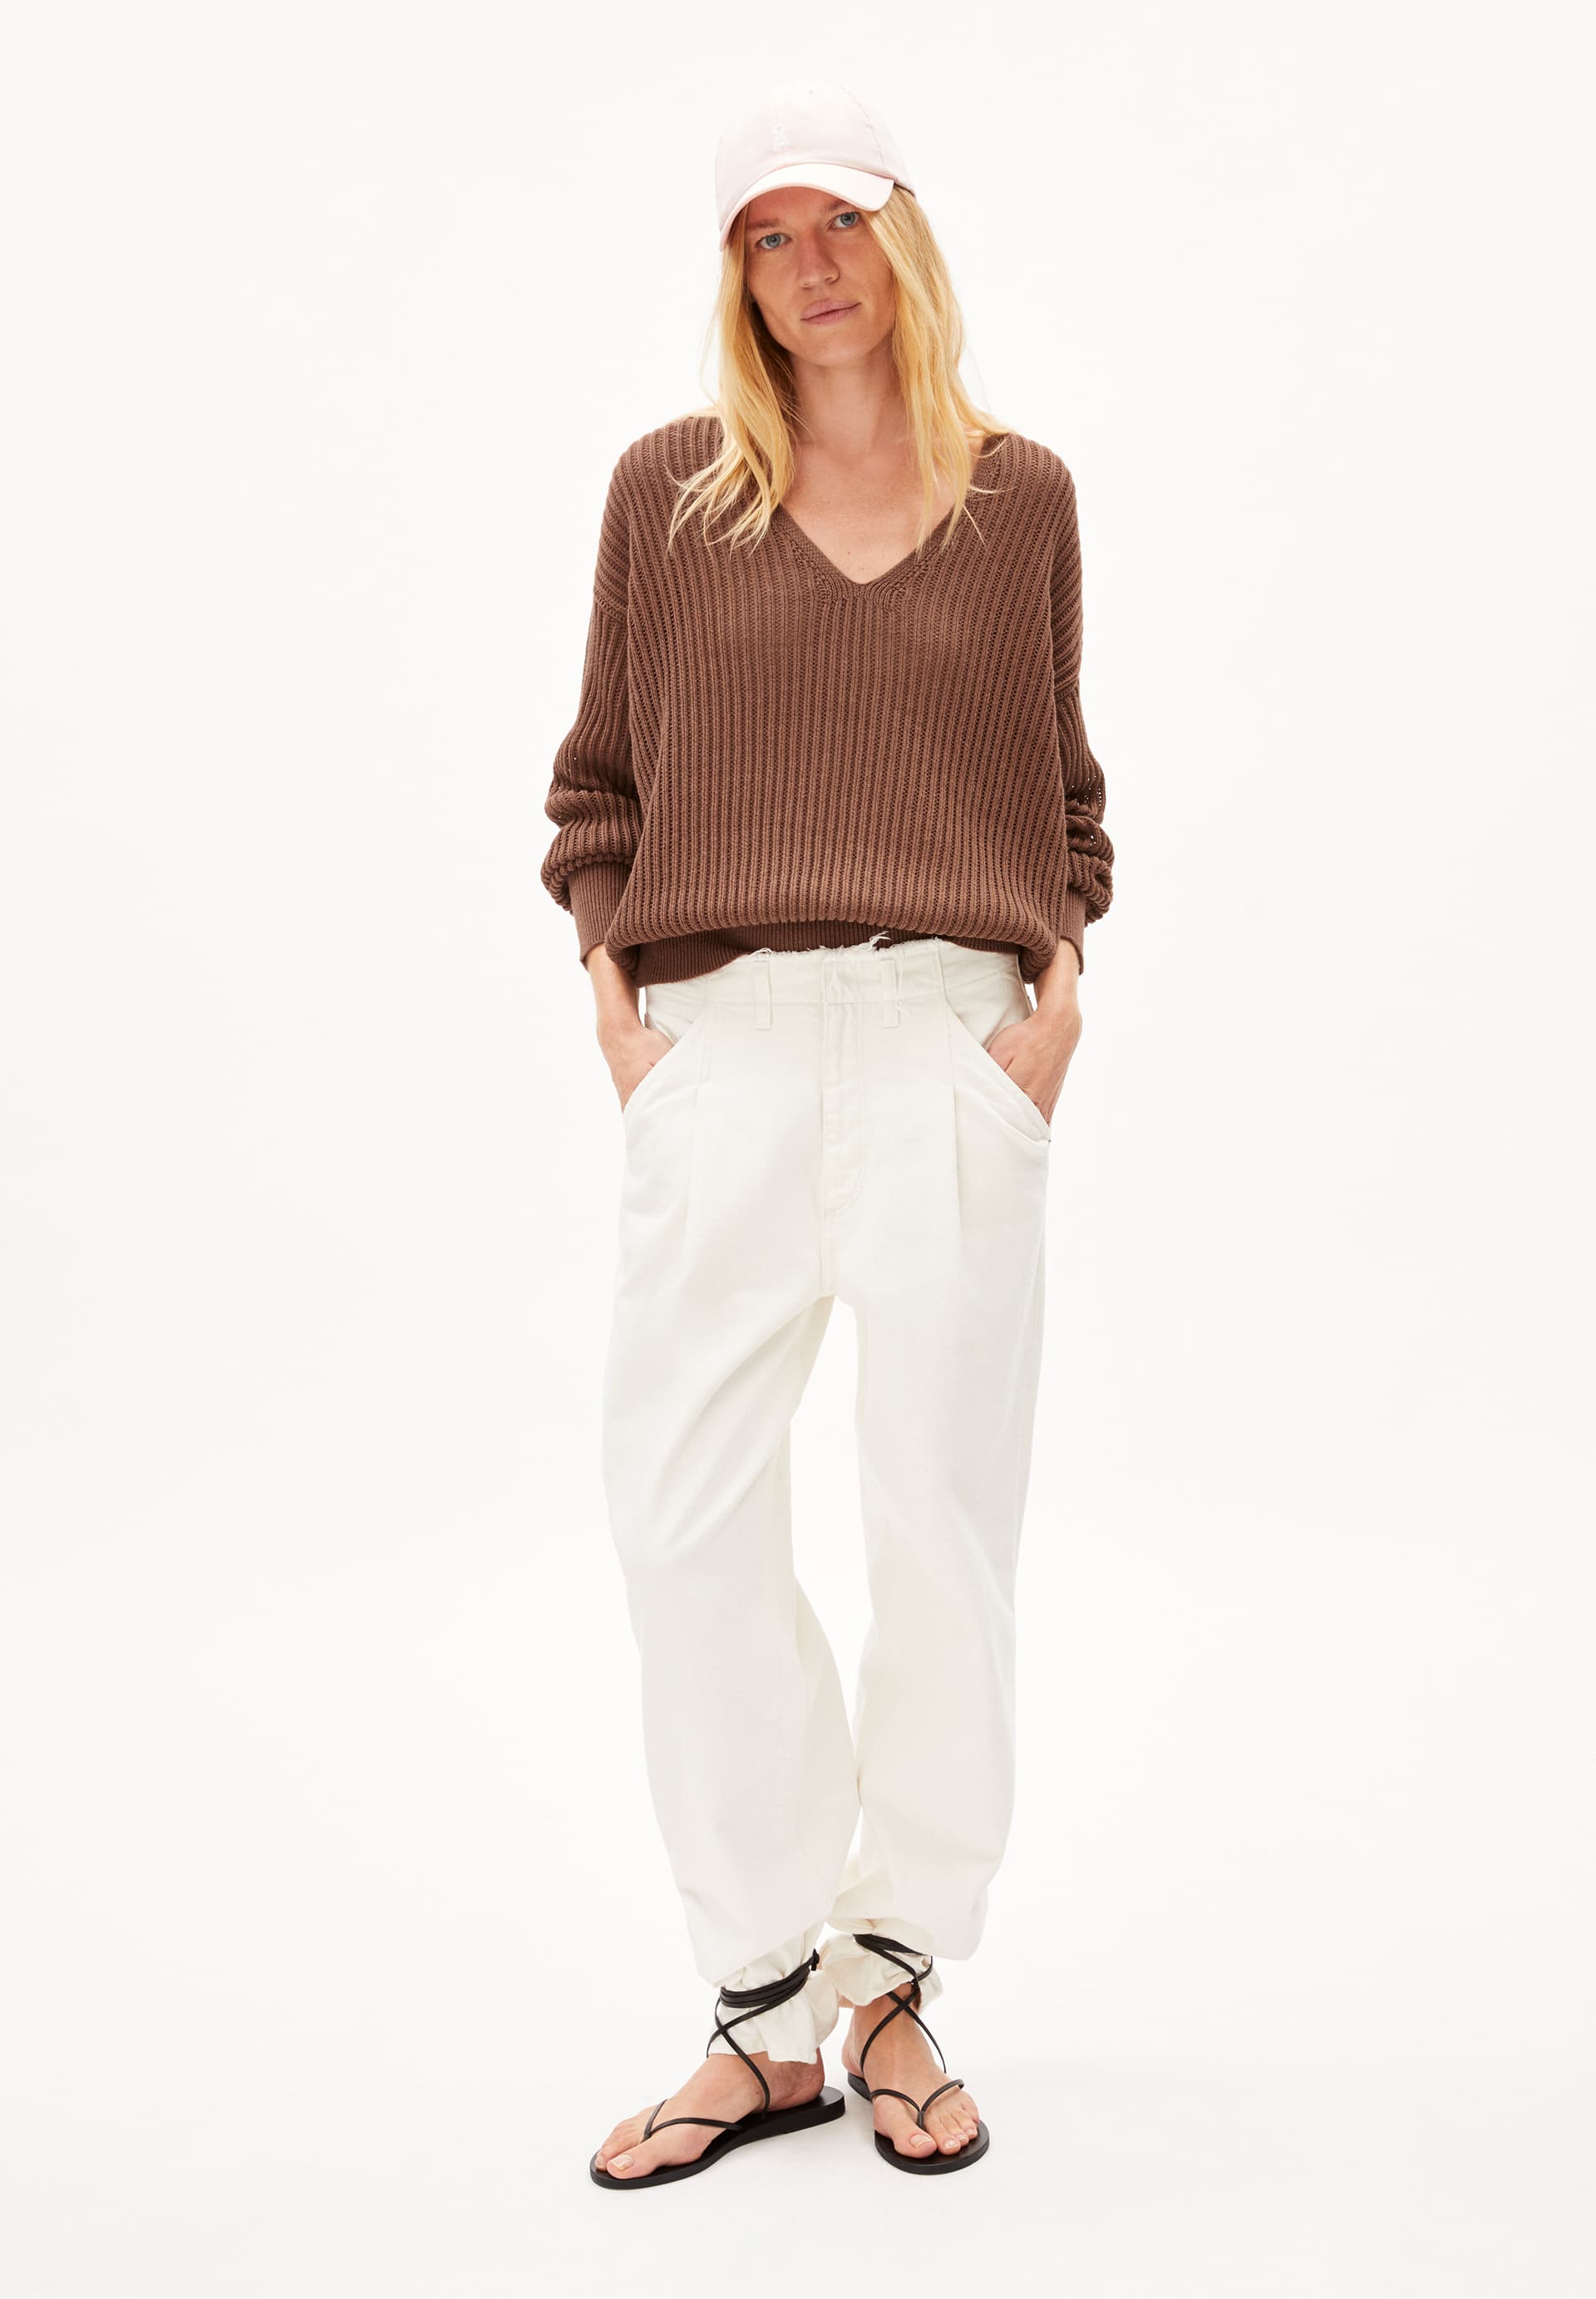 RANAA CROCHET LINO Sweater Loose Fit made of Linen-Mix